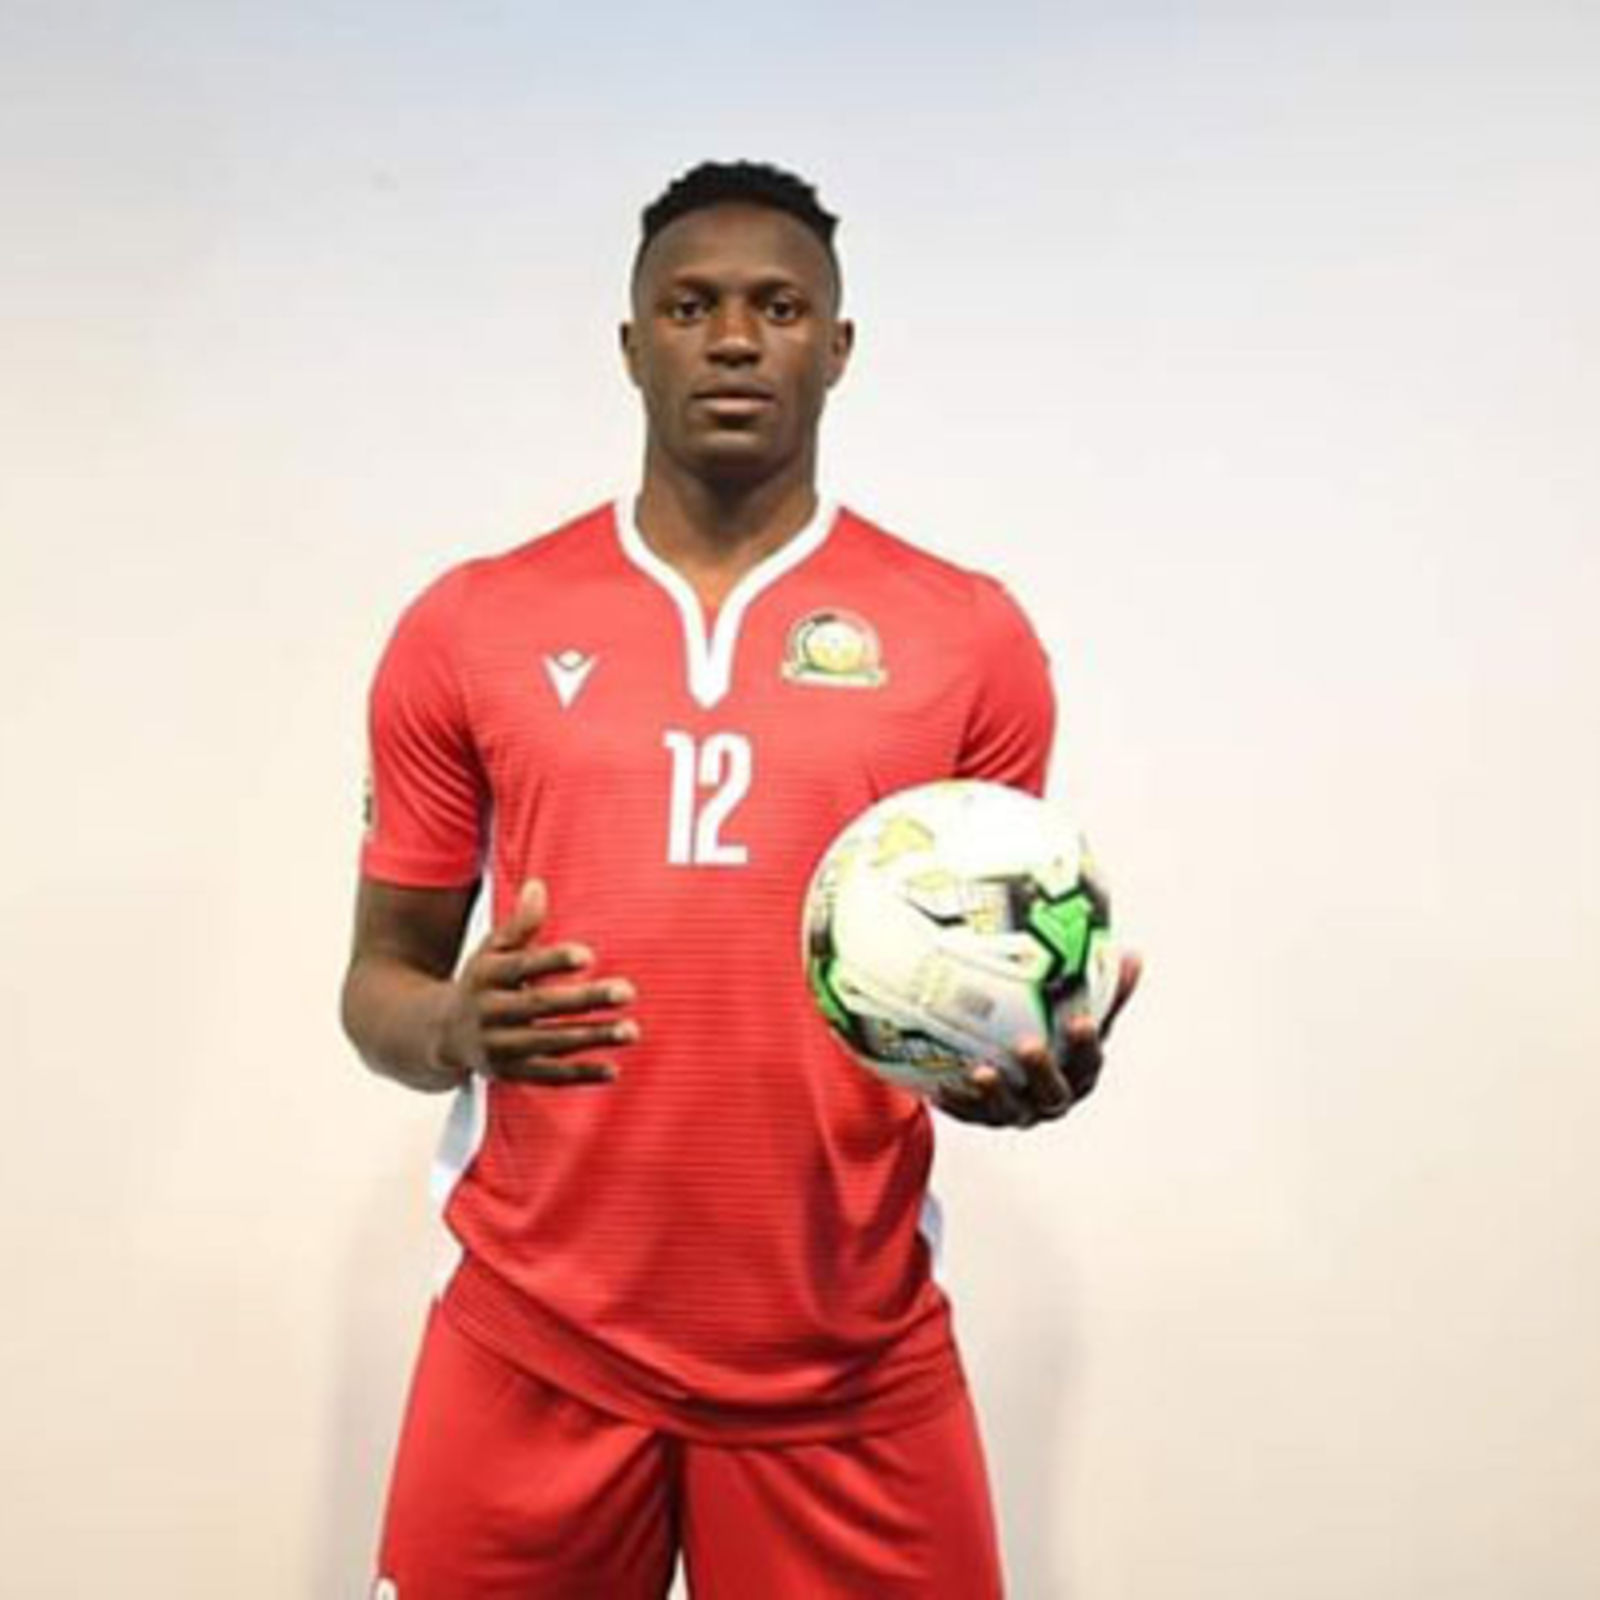 Afcon: Harambee Stars captain Victor Wanyama to wear jersey number 14